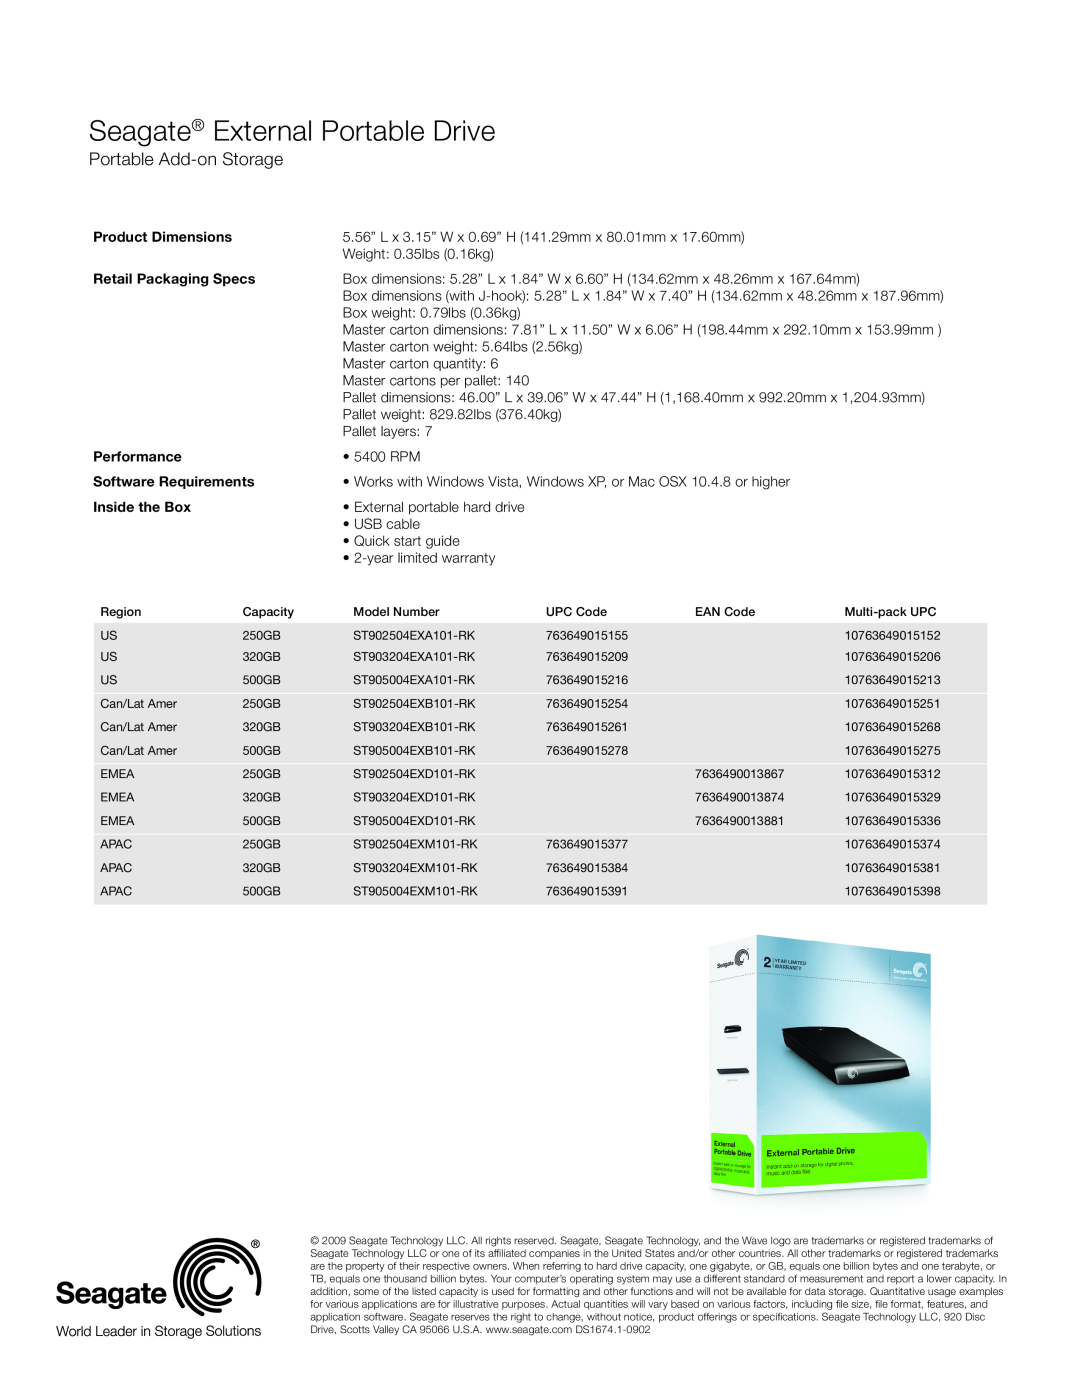 Seagate ST905004EXM101-RK Product Dimensions, Retail Packaging Specs, Performance, Software Requirements, Inside the Box 